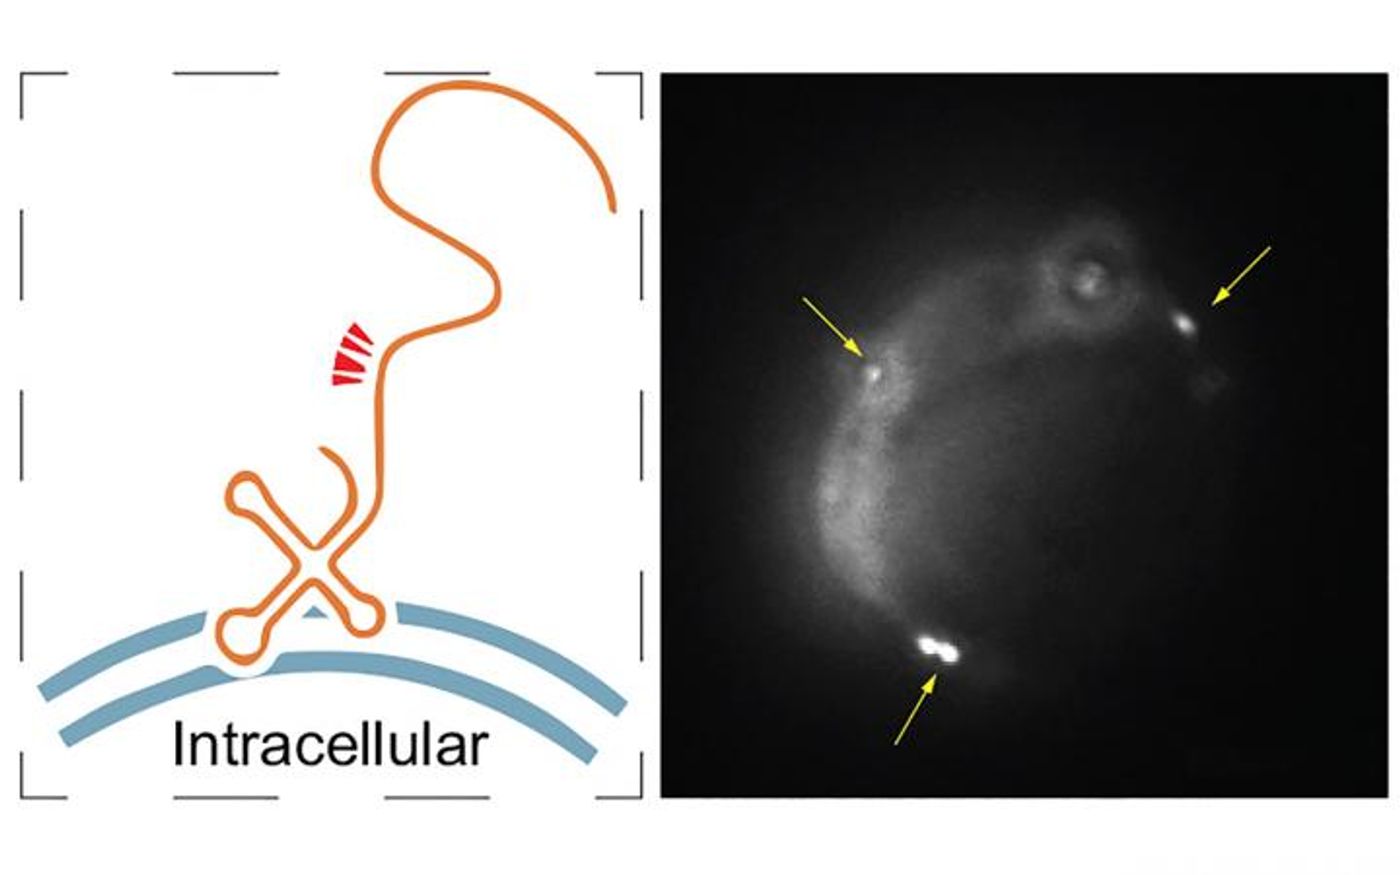 (Left) A hypothetical model of the relative positions of FISH probes (red arrowheads) on a membrane-bound RNA fragment. (Right) A single molecule RNA fluorescence in situ hybridization image of maxRNAs (yellow arrows). / Credit: Zhong Lab